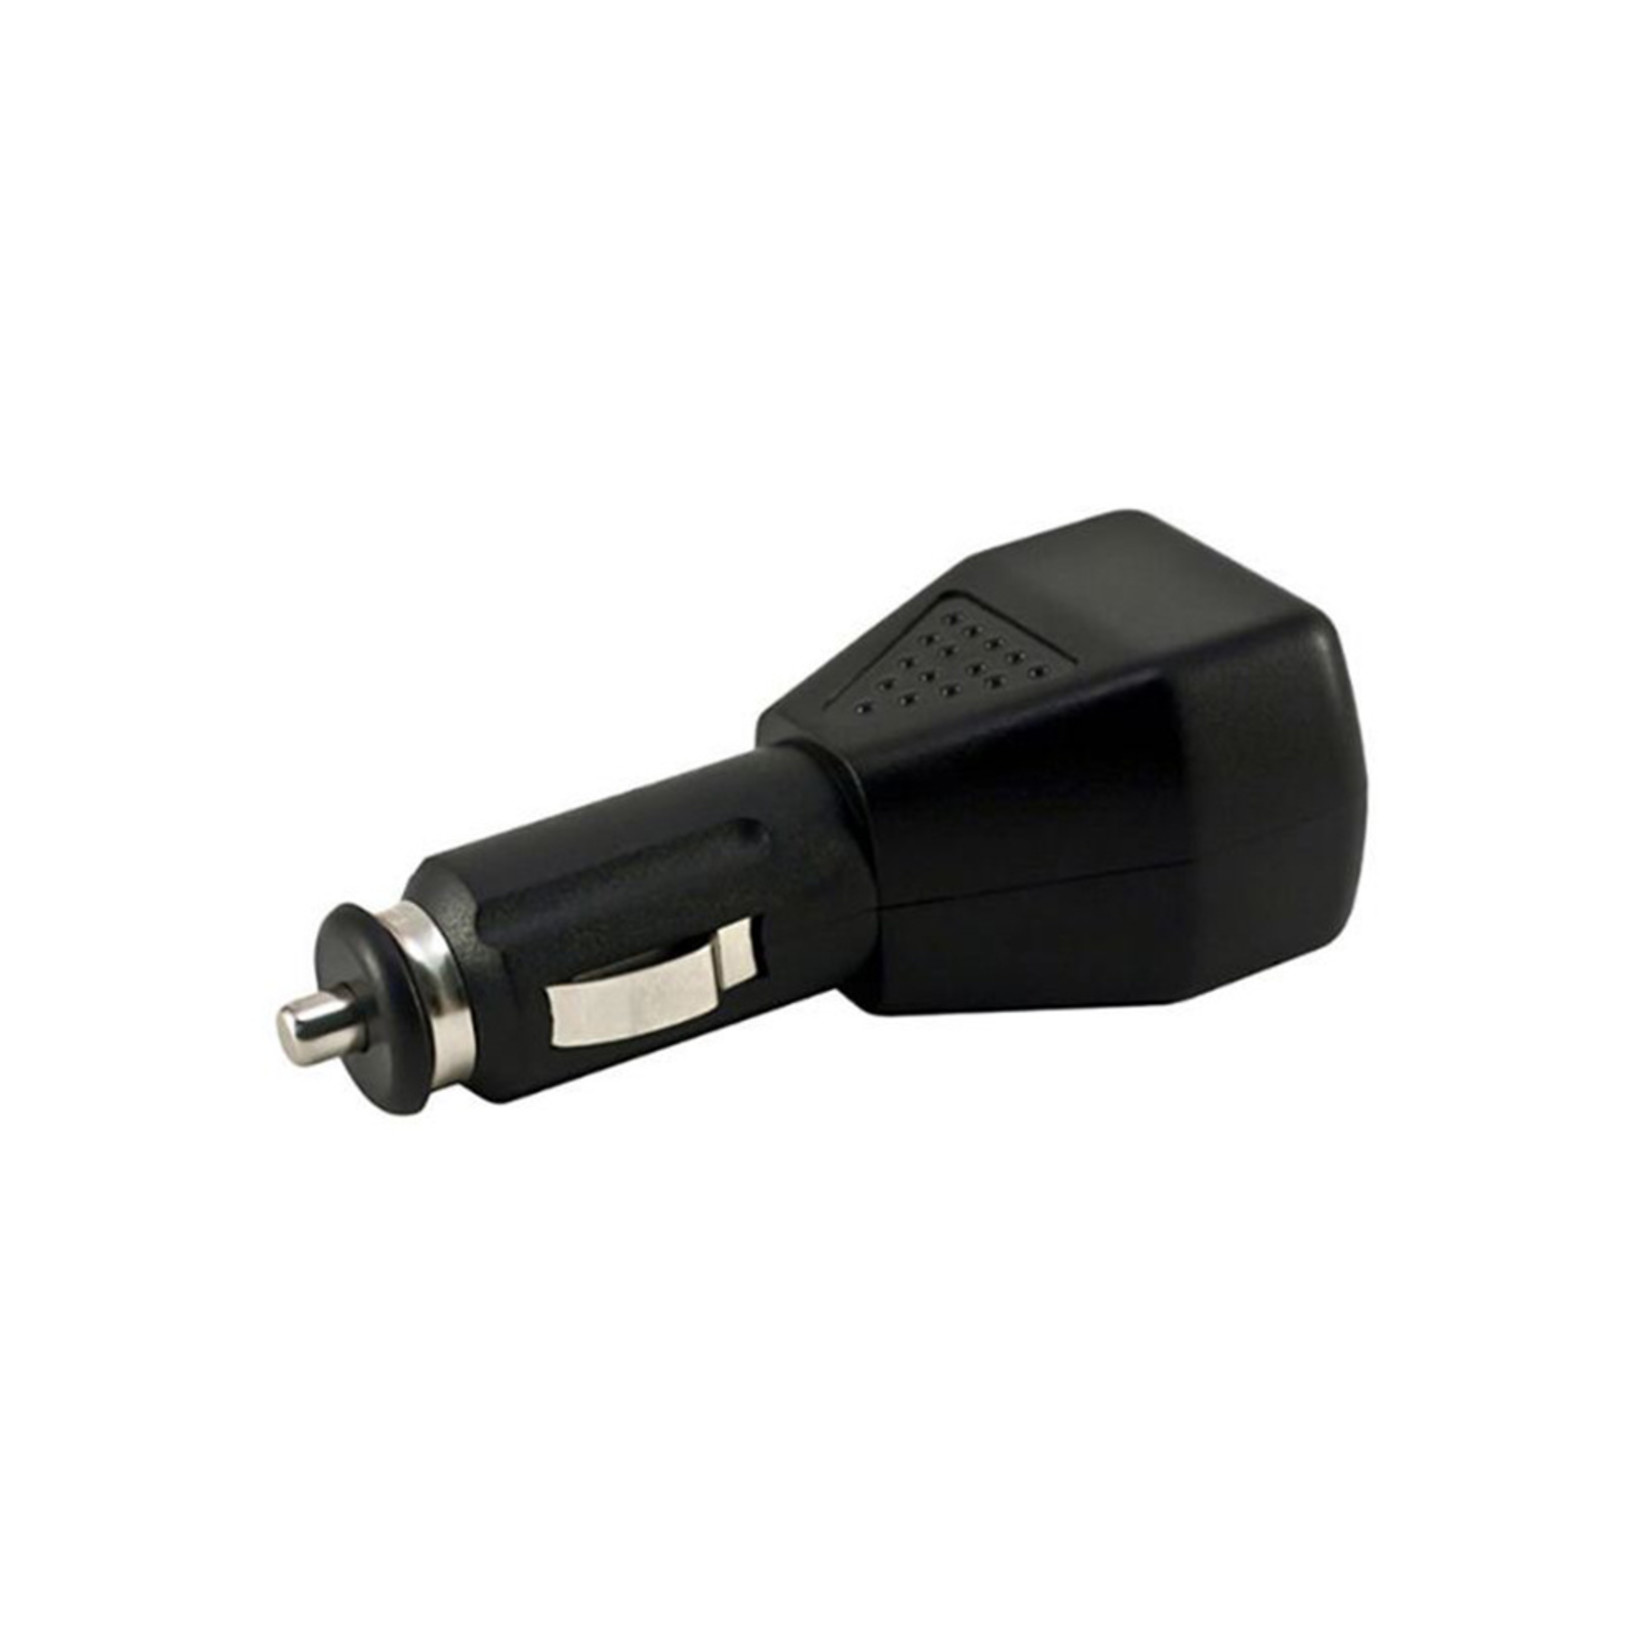 Niterider NiteRider NR-6253-U USB In-Vehicle Charge Adapter For USB Rechargeable Batteries